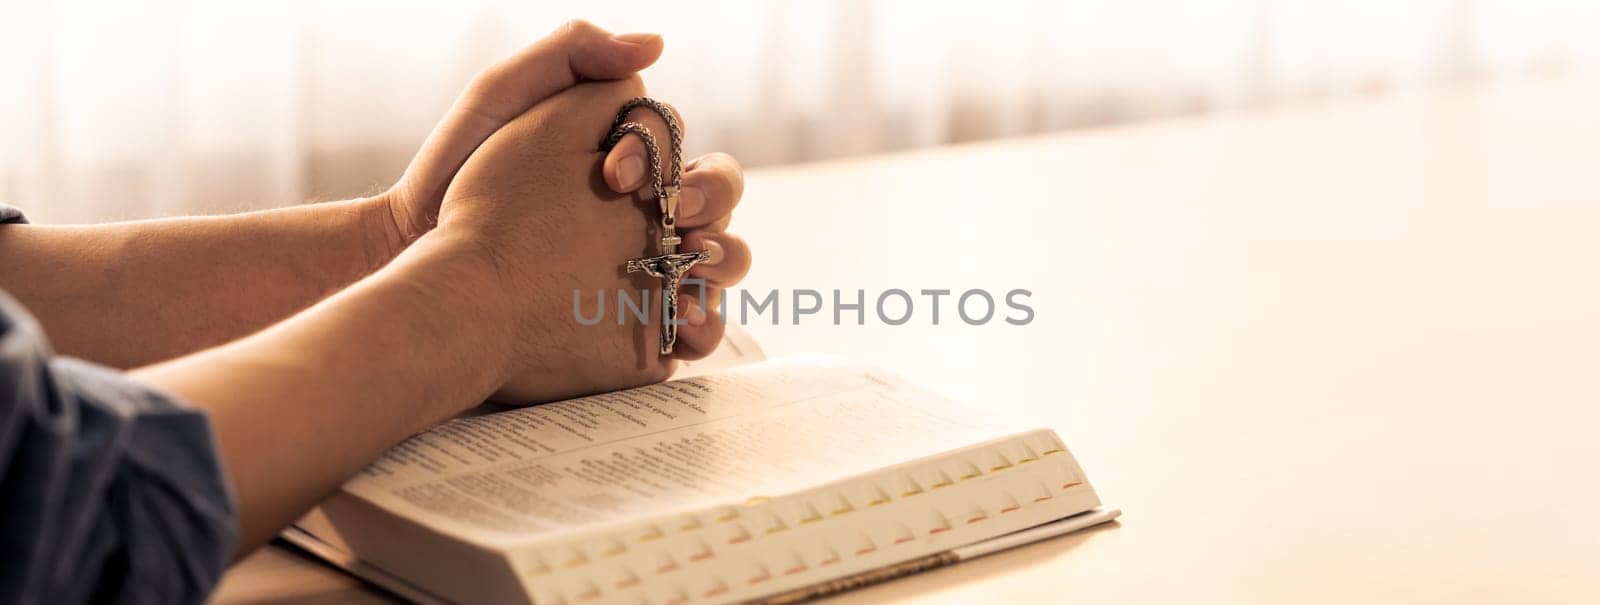 Asian male folded hand prayed on holy bible book while holding up a pendant crucifix. Spiritual, religion, faith, worship, christian and blessing of god concept. Blurring background. Burgeoning.